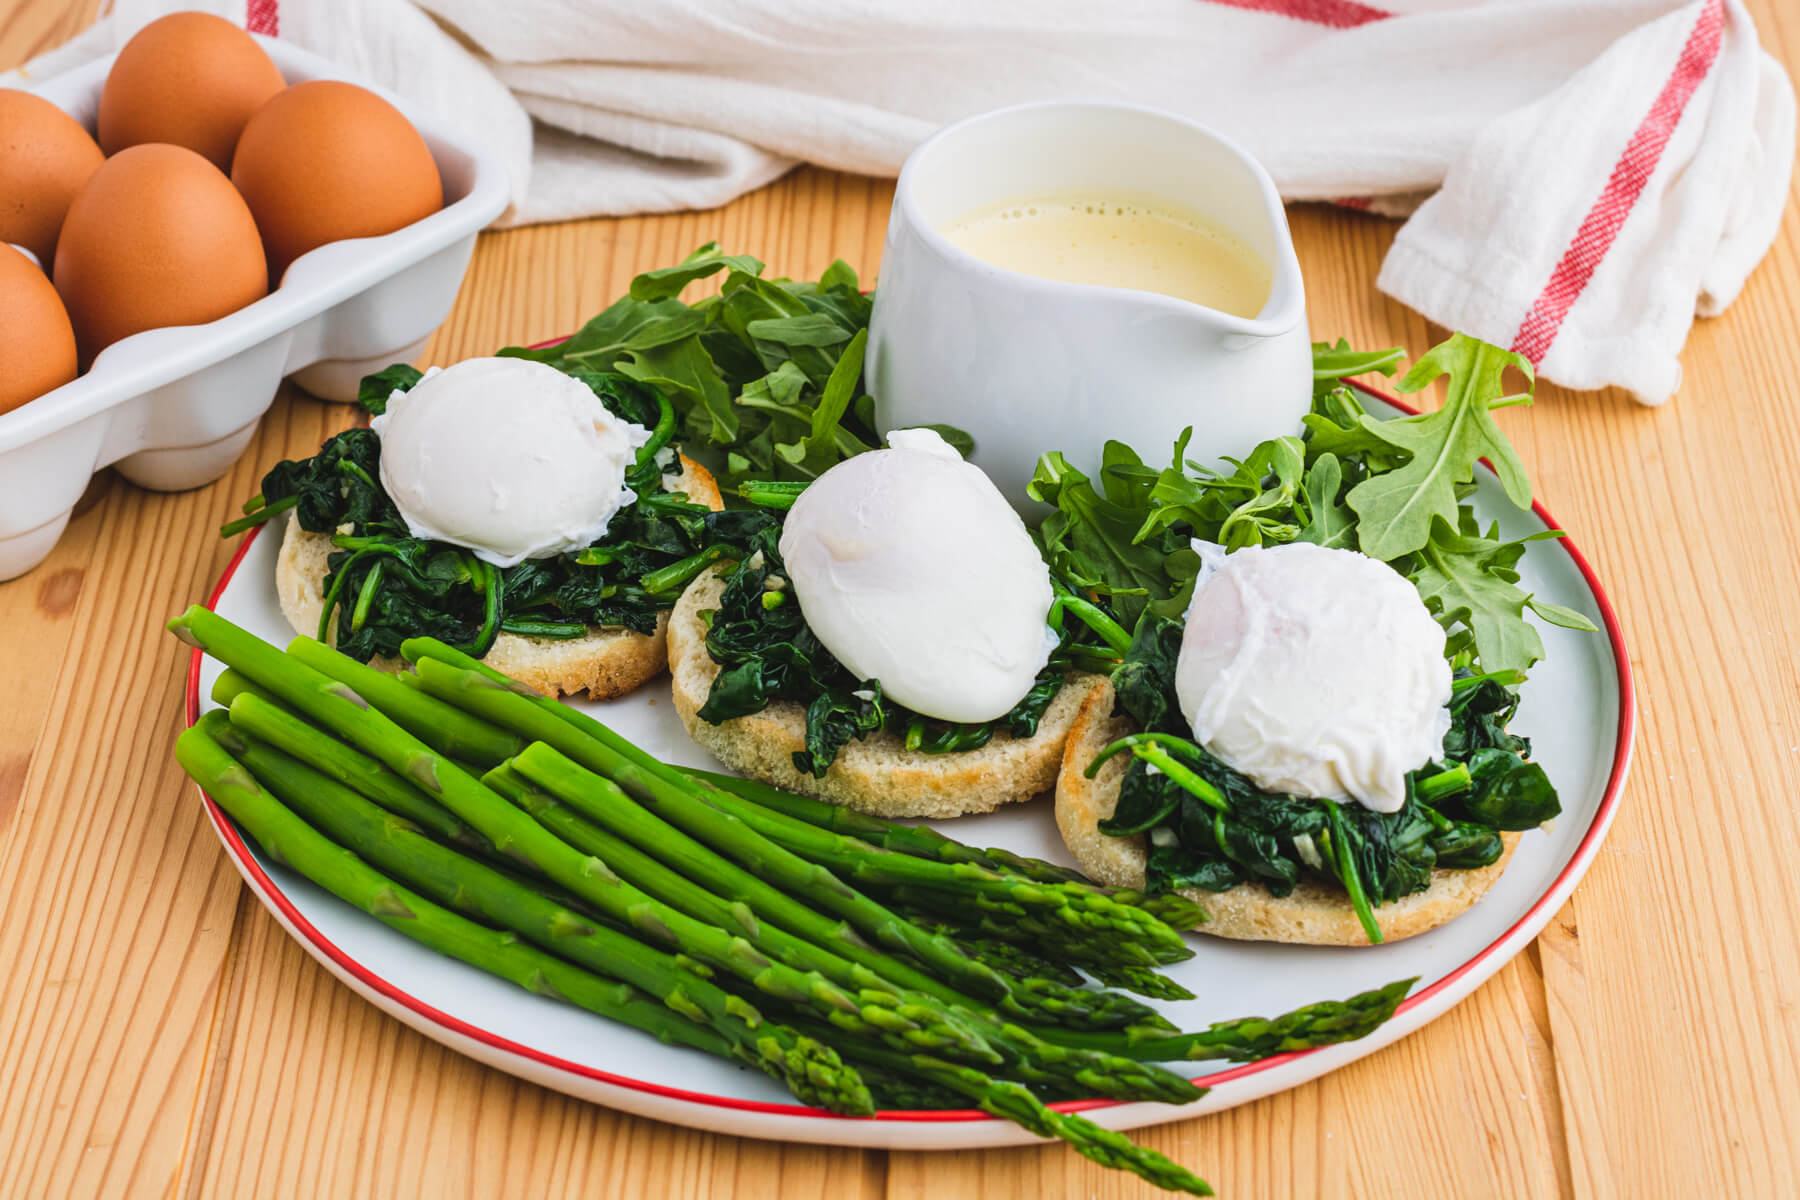 A red rimmed white plate holding two poached eggs ready to be covered in creamy yellow hollandaise sauce over a bed of spinach on toasted English muffins with a side of asparagus and baby arugula.